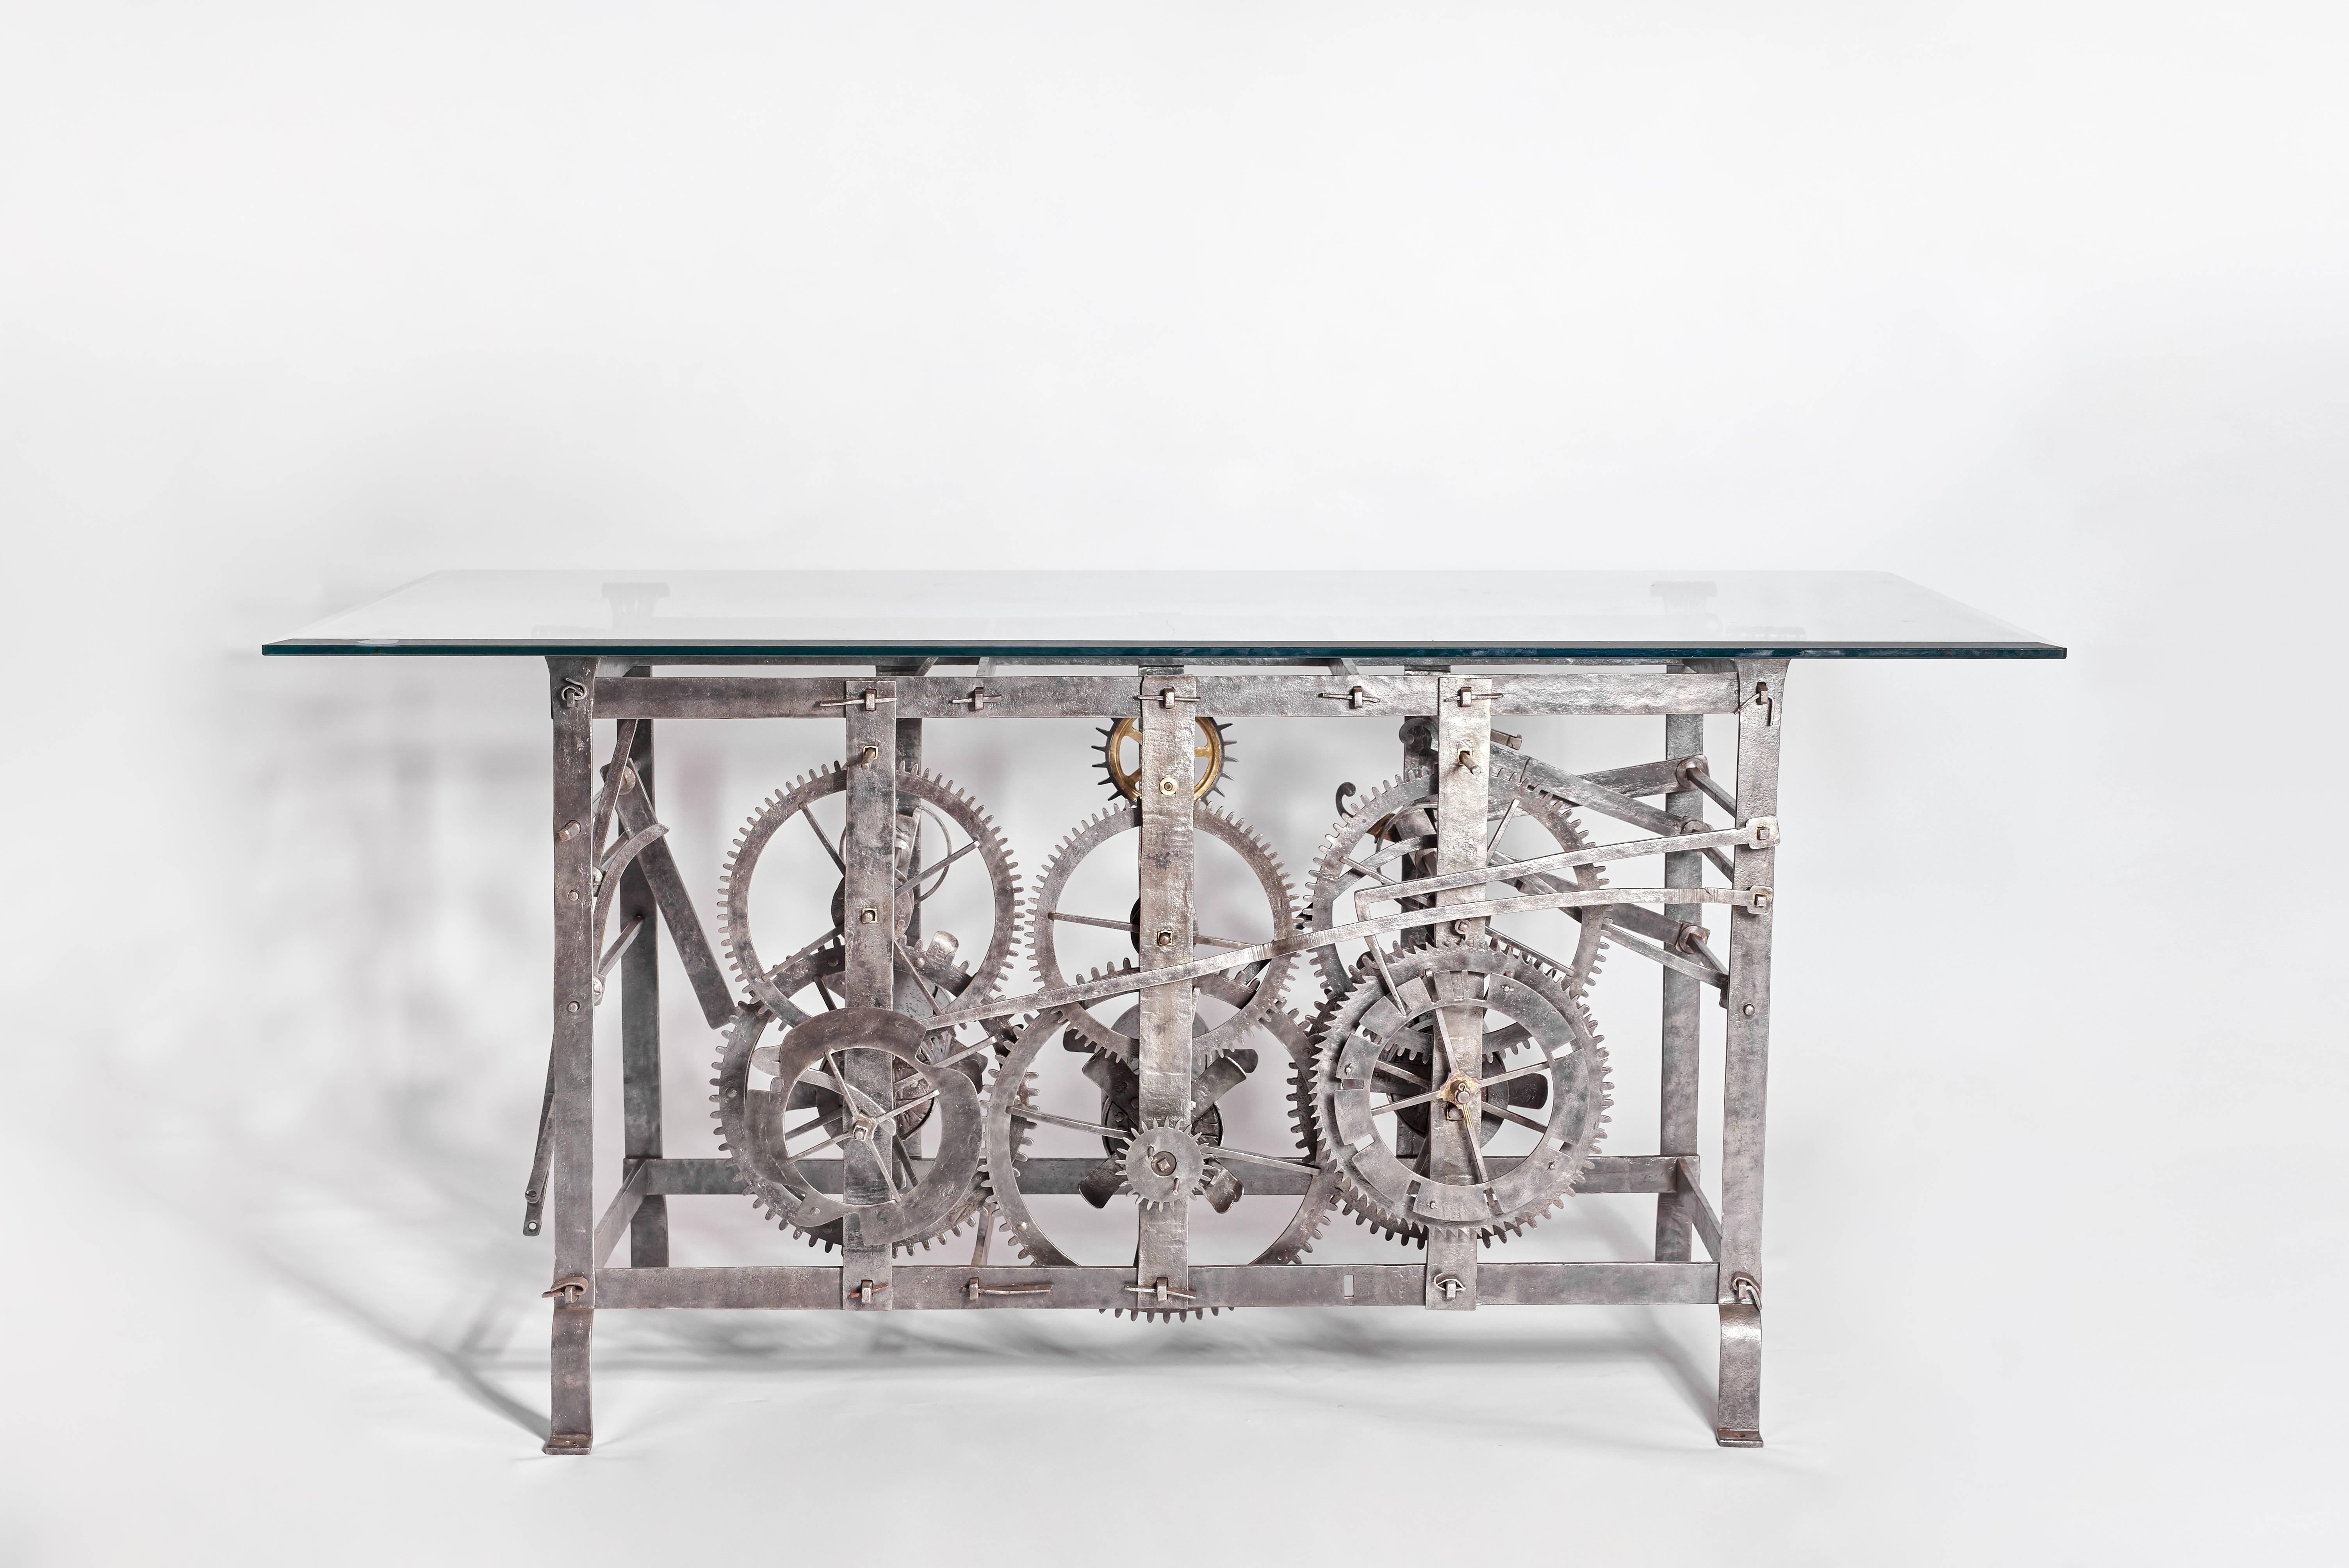 Beautiful table designed from an authentic 18th century Italian tower turret clock mechanism. This mechanism was used for large clocks and bells you find up churches and public towers to keep time for the Community. 

The mechanism is included in